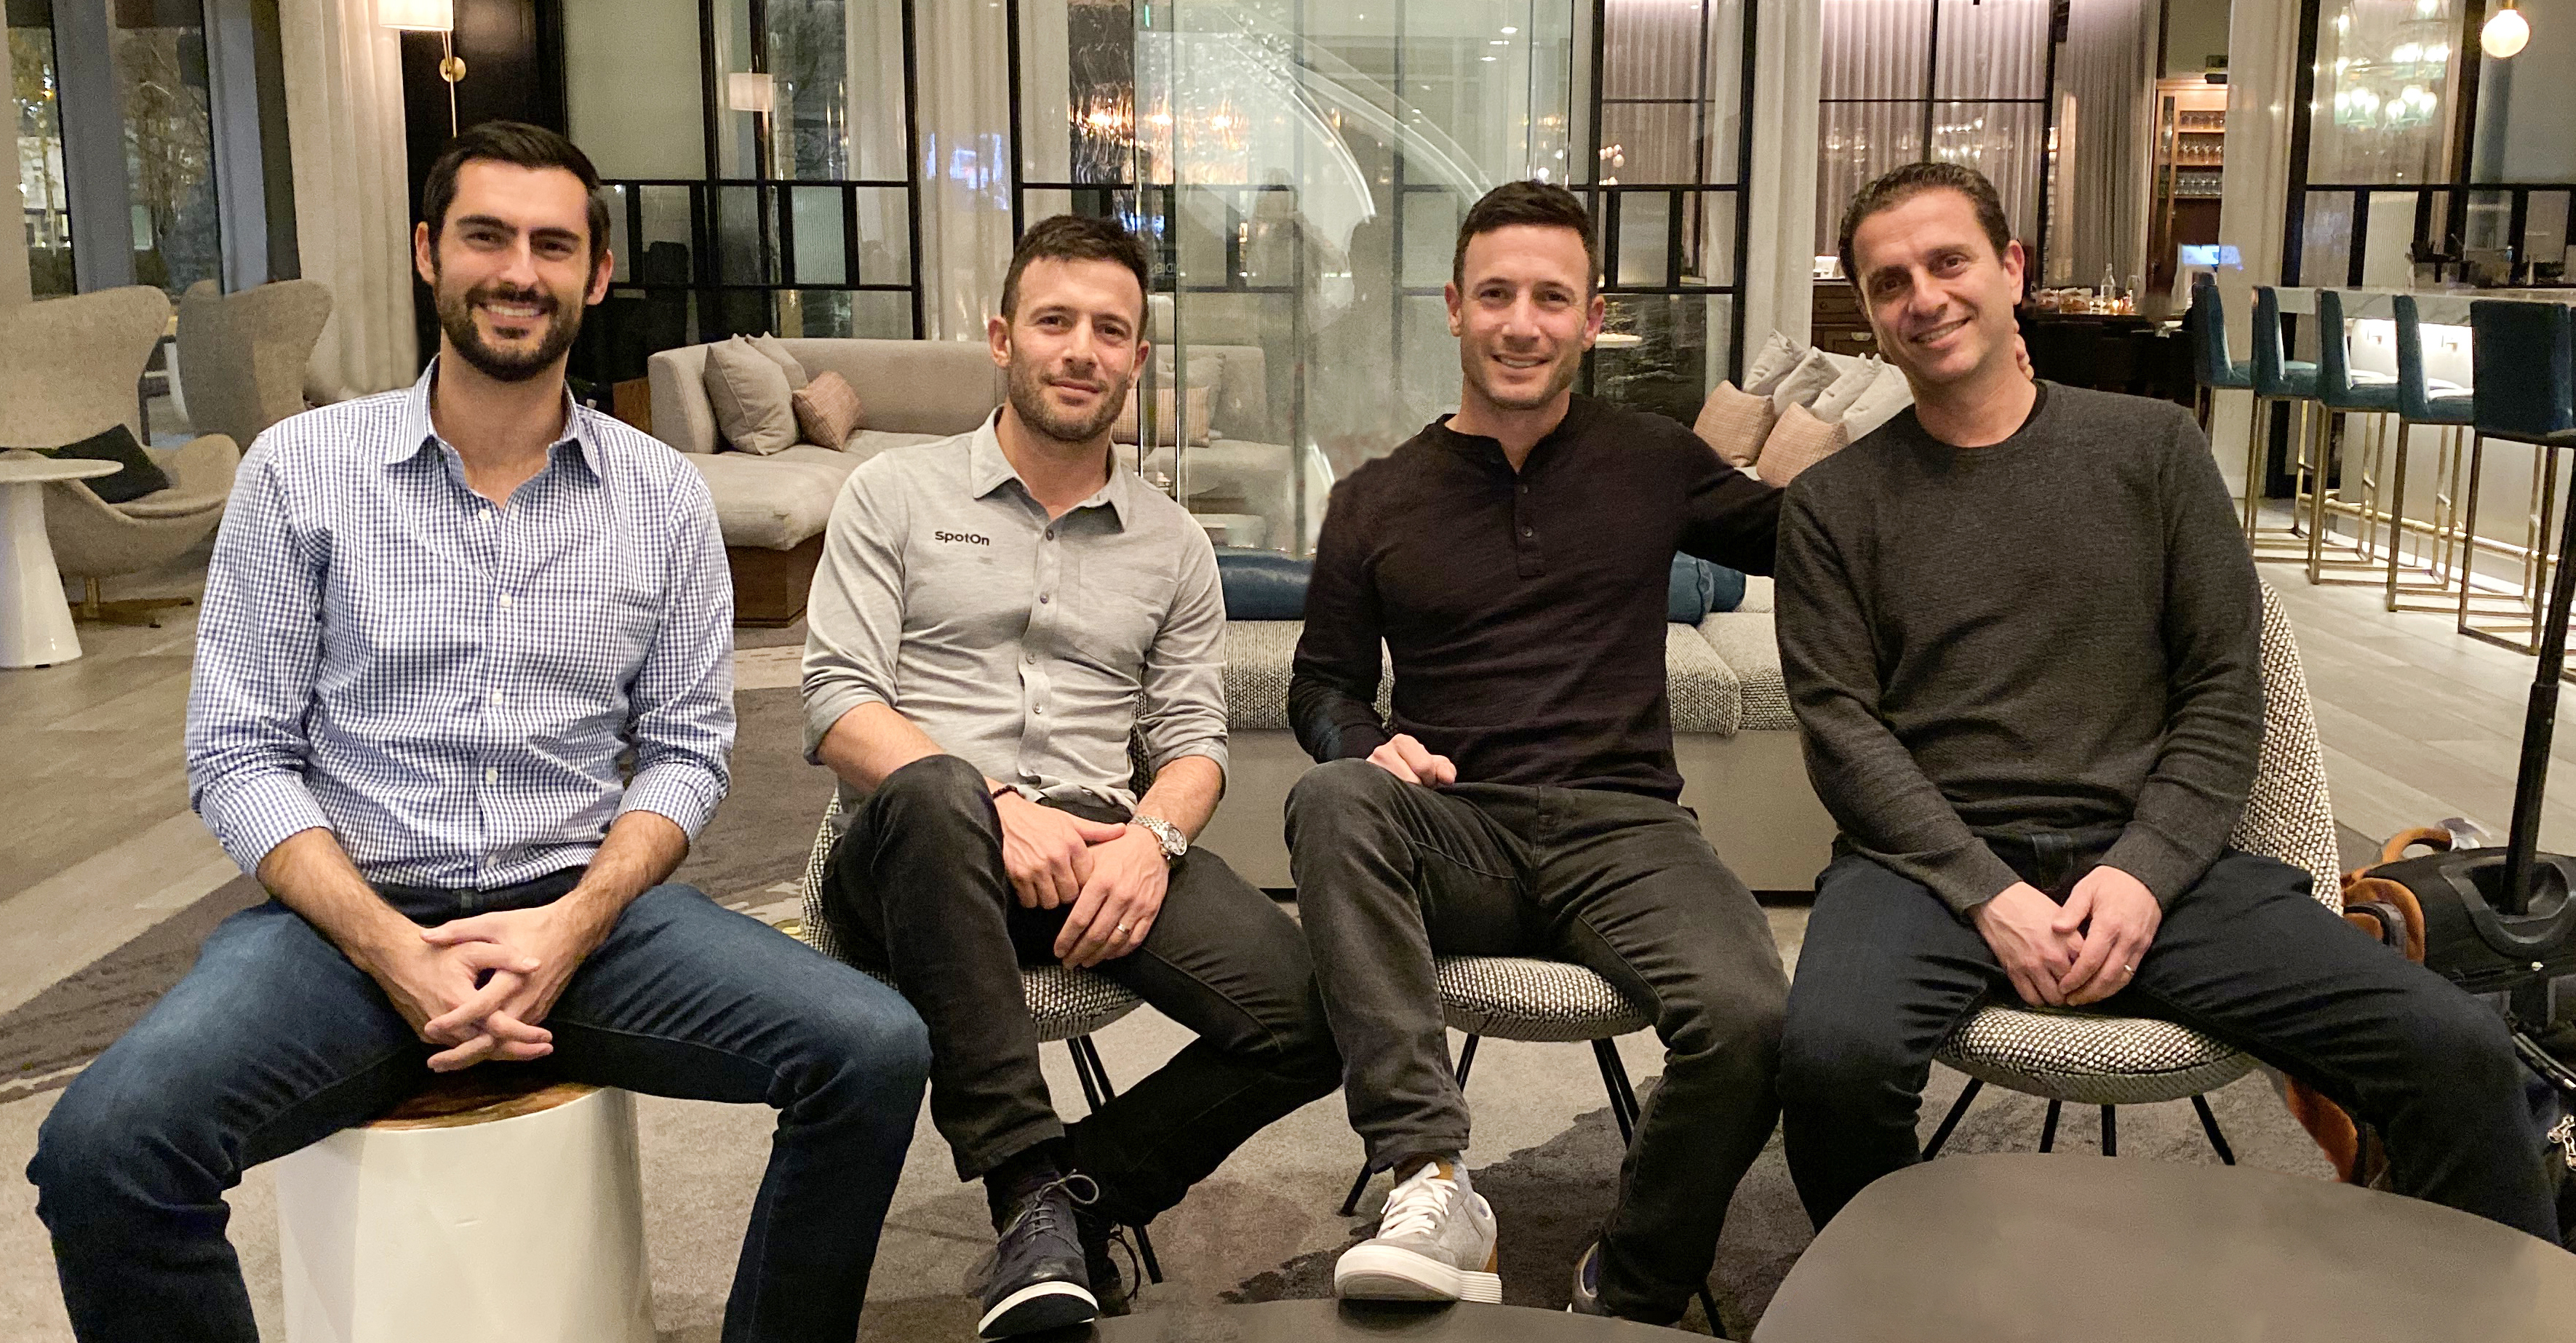 X 上的SpotOn：「After a fantastic day in #Denver, SpotOn President RJ Horsley  and Co-Founders Zach Hyman, Matt Hyman, and Doron Friedman got a chance to  spend some time catching up. #WeAreSpotOn #SpotOnDenver